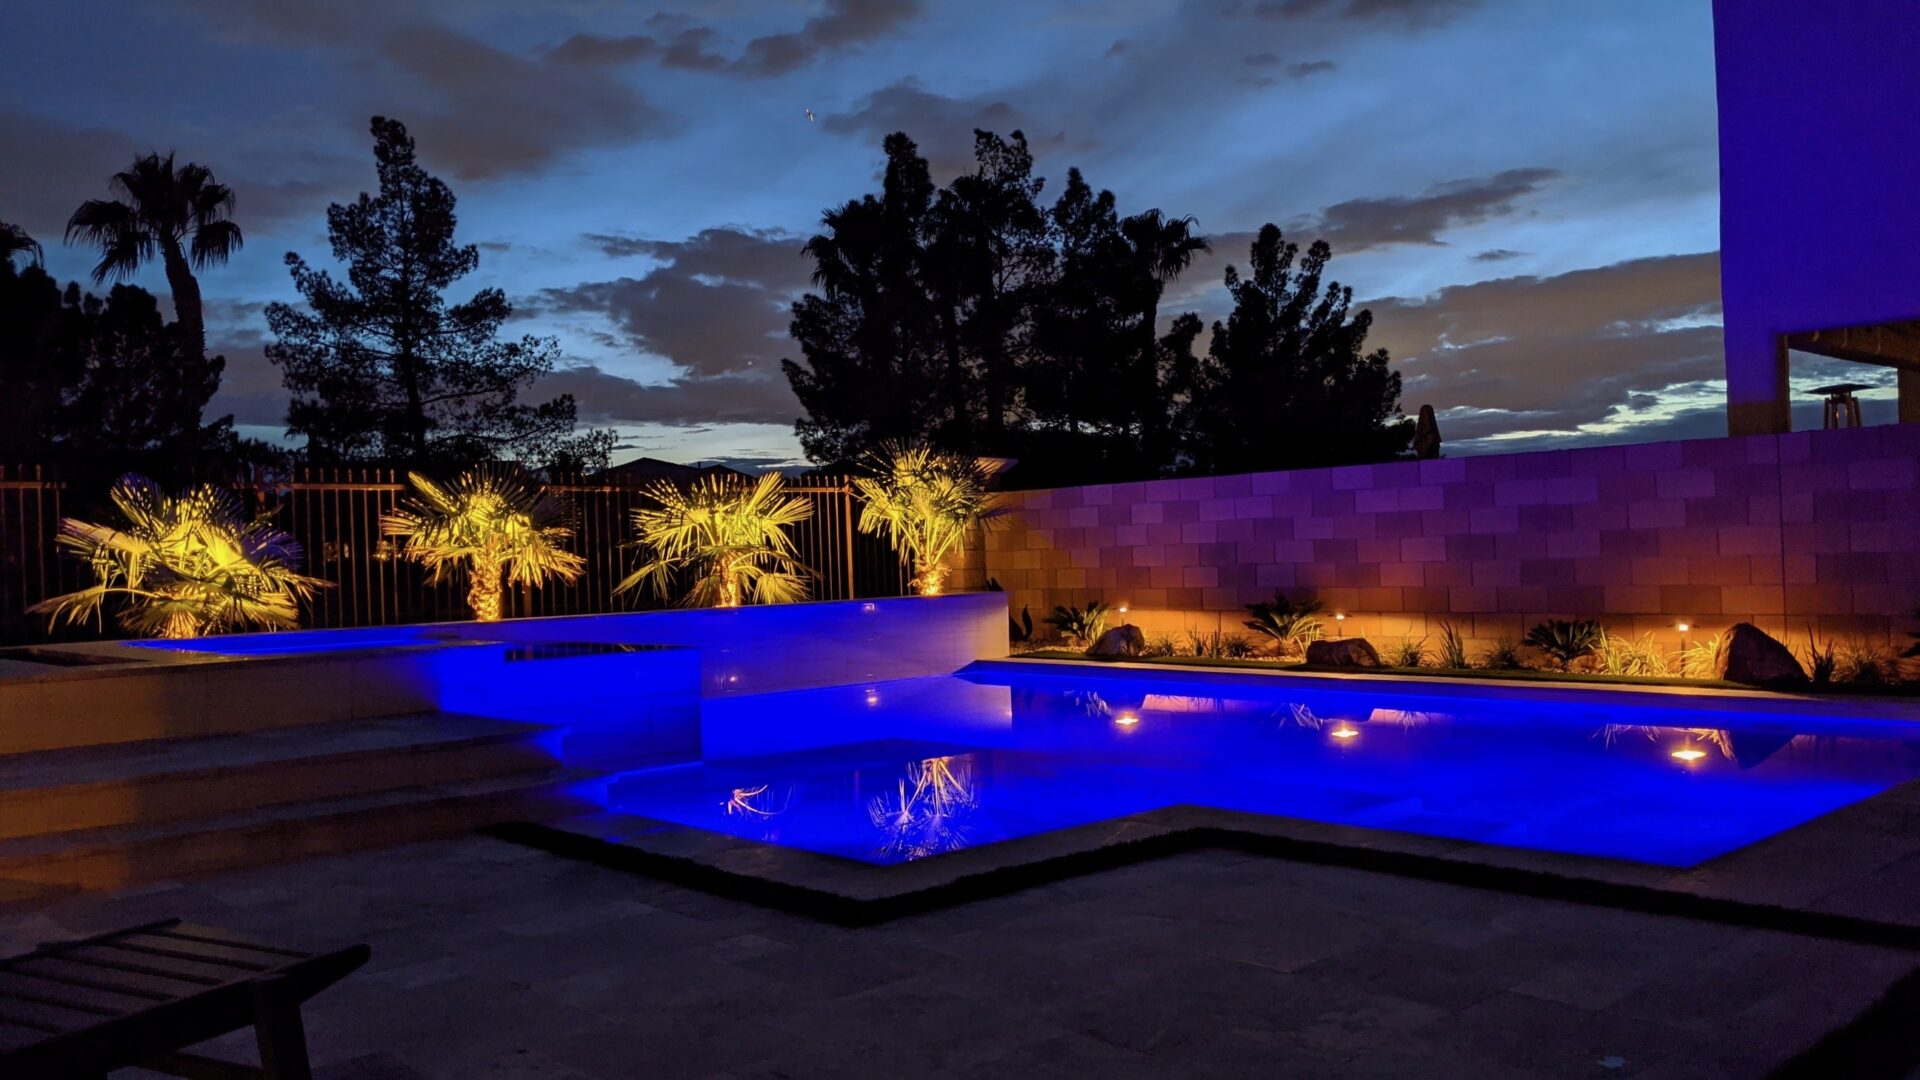 A pool with lights on and palm trees in the background.